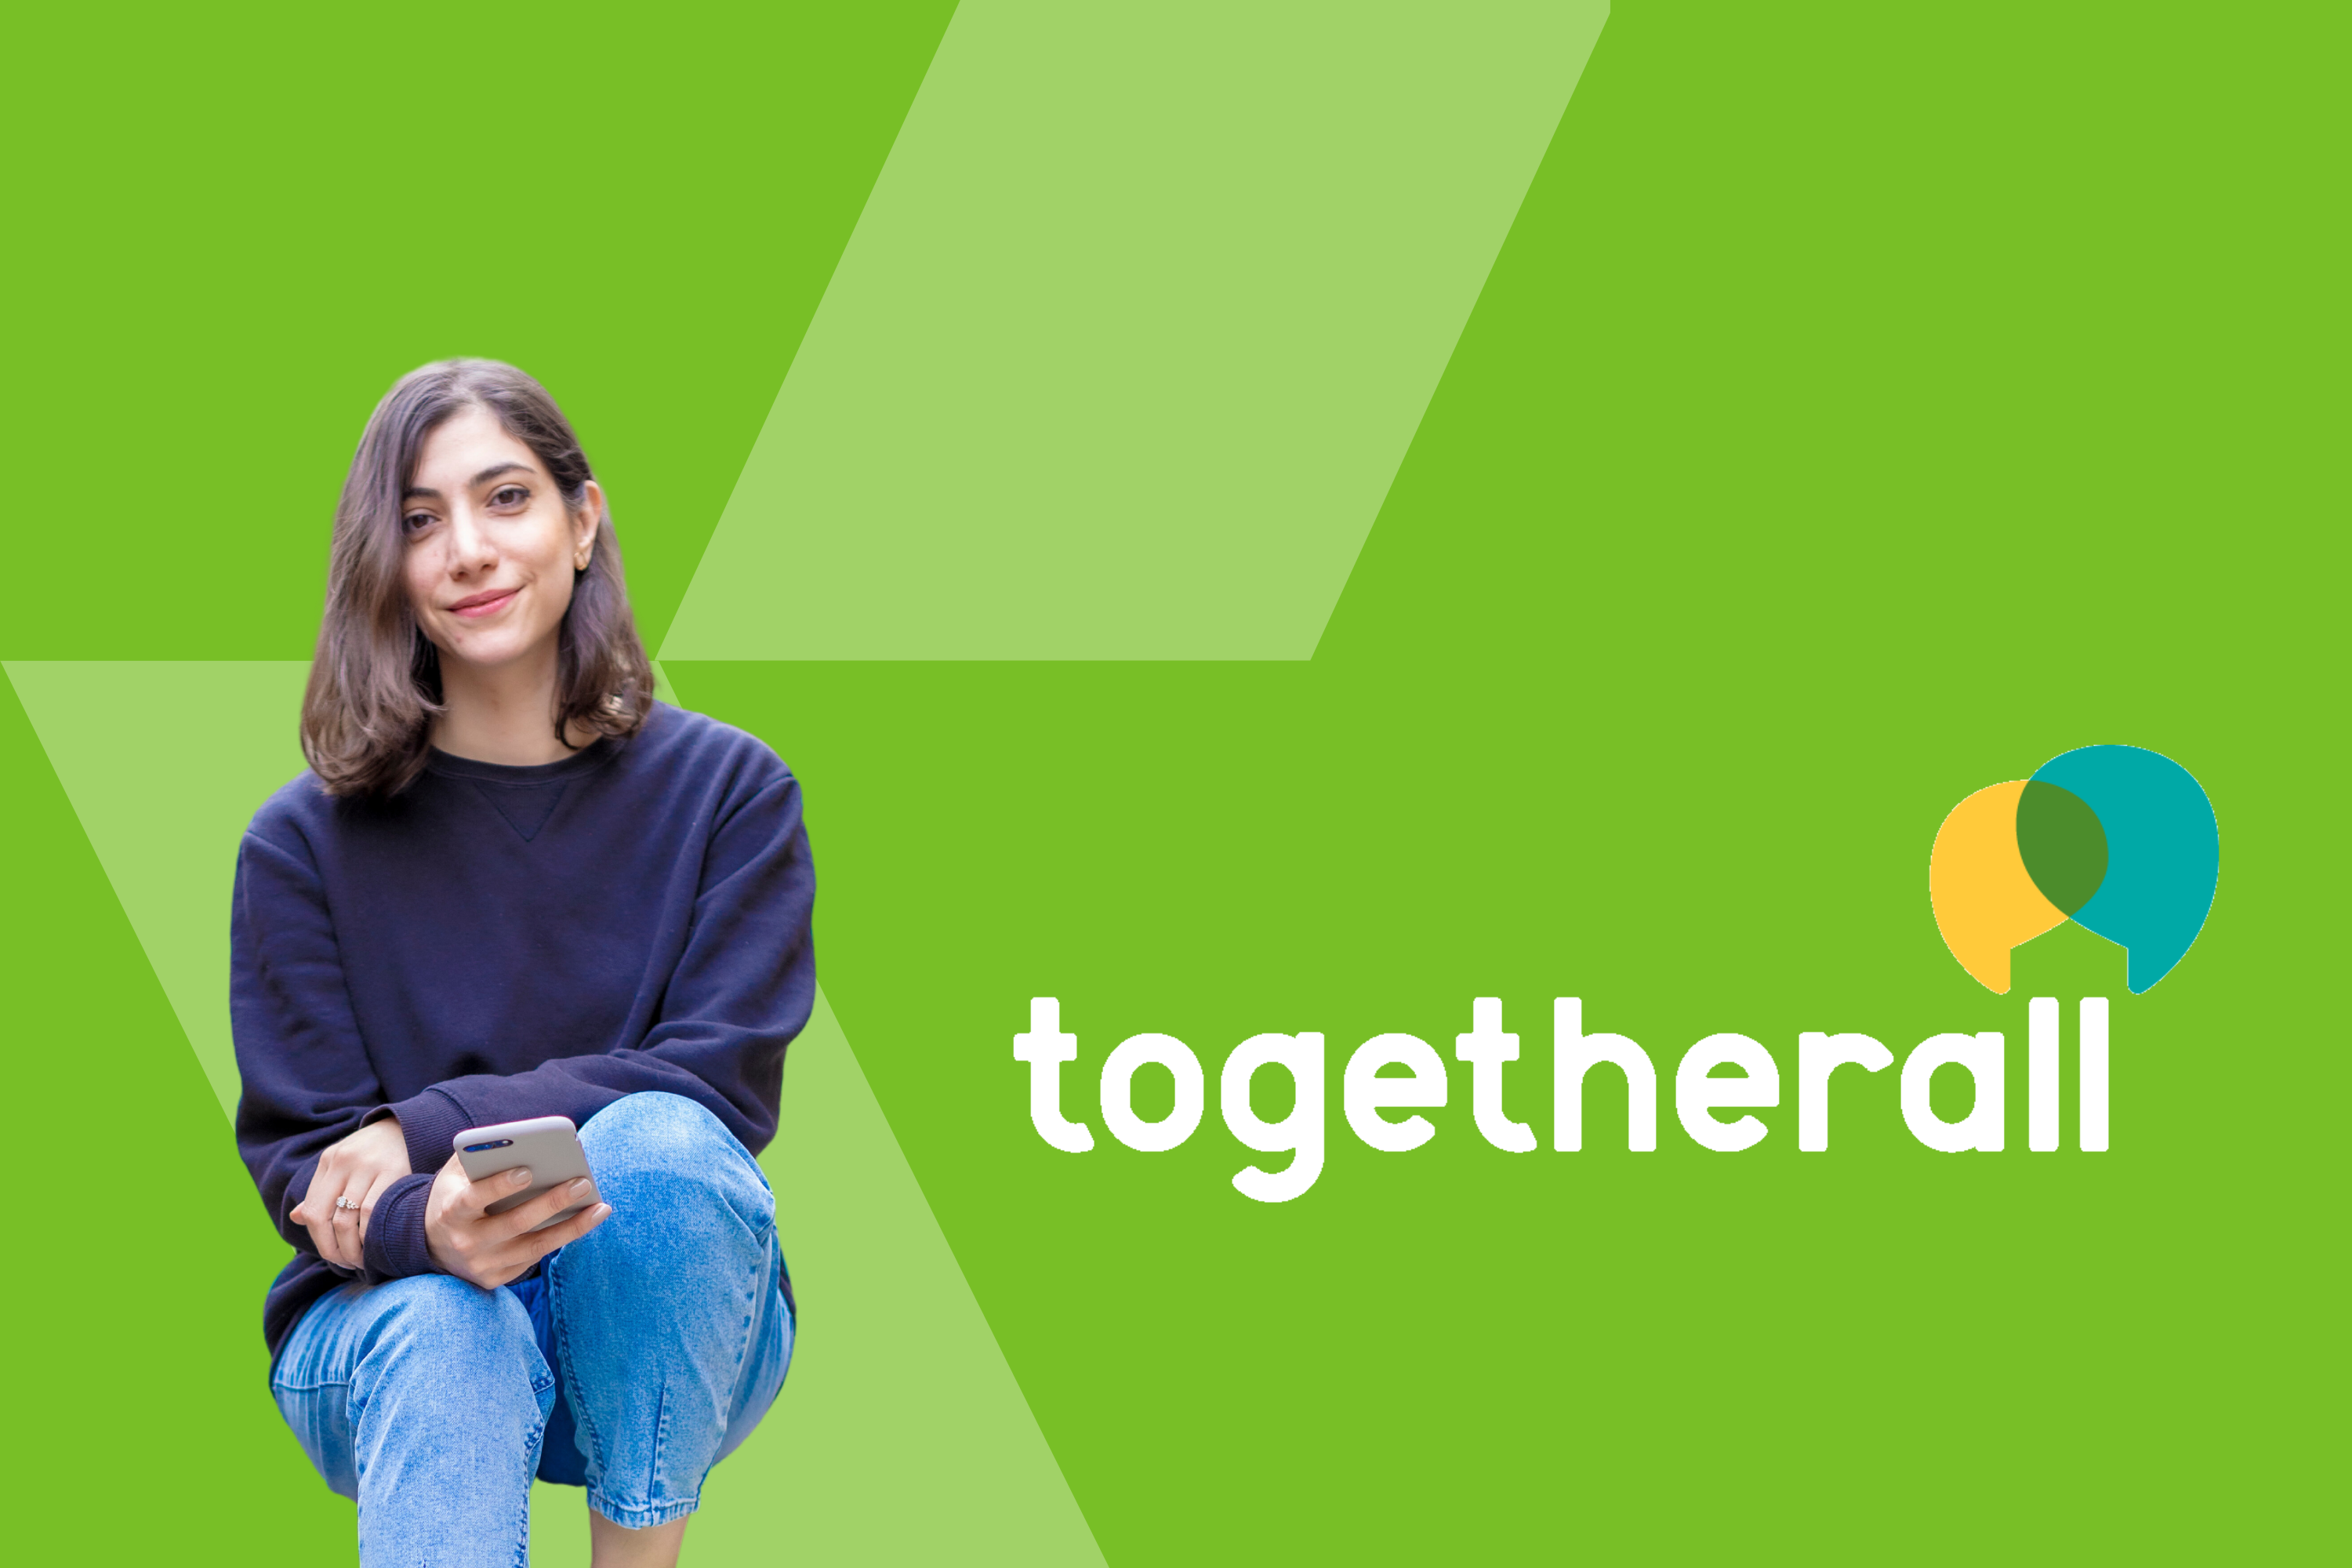 Bright green background with Togetherall logo and student holding phone.